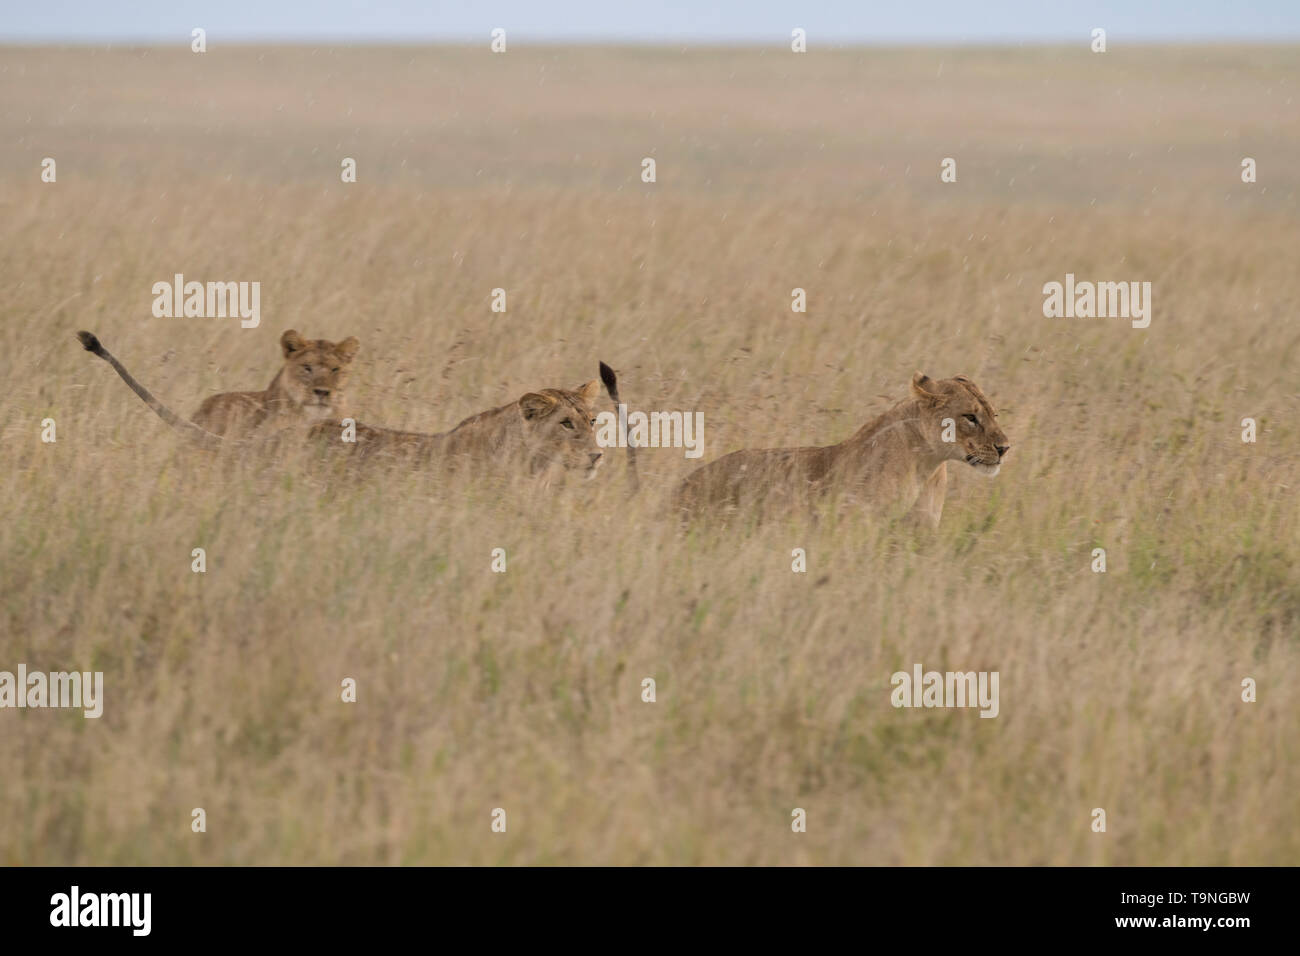 Lions chasing each other, Serengeti National Park Stock Photo